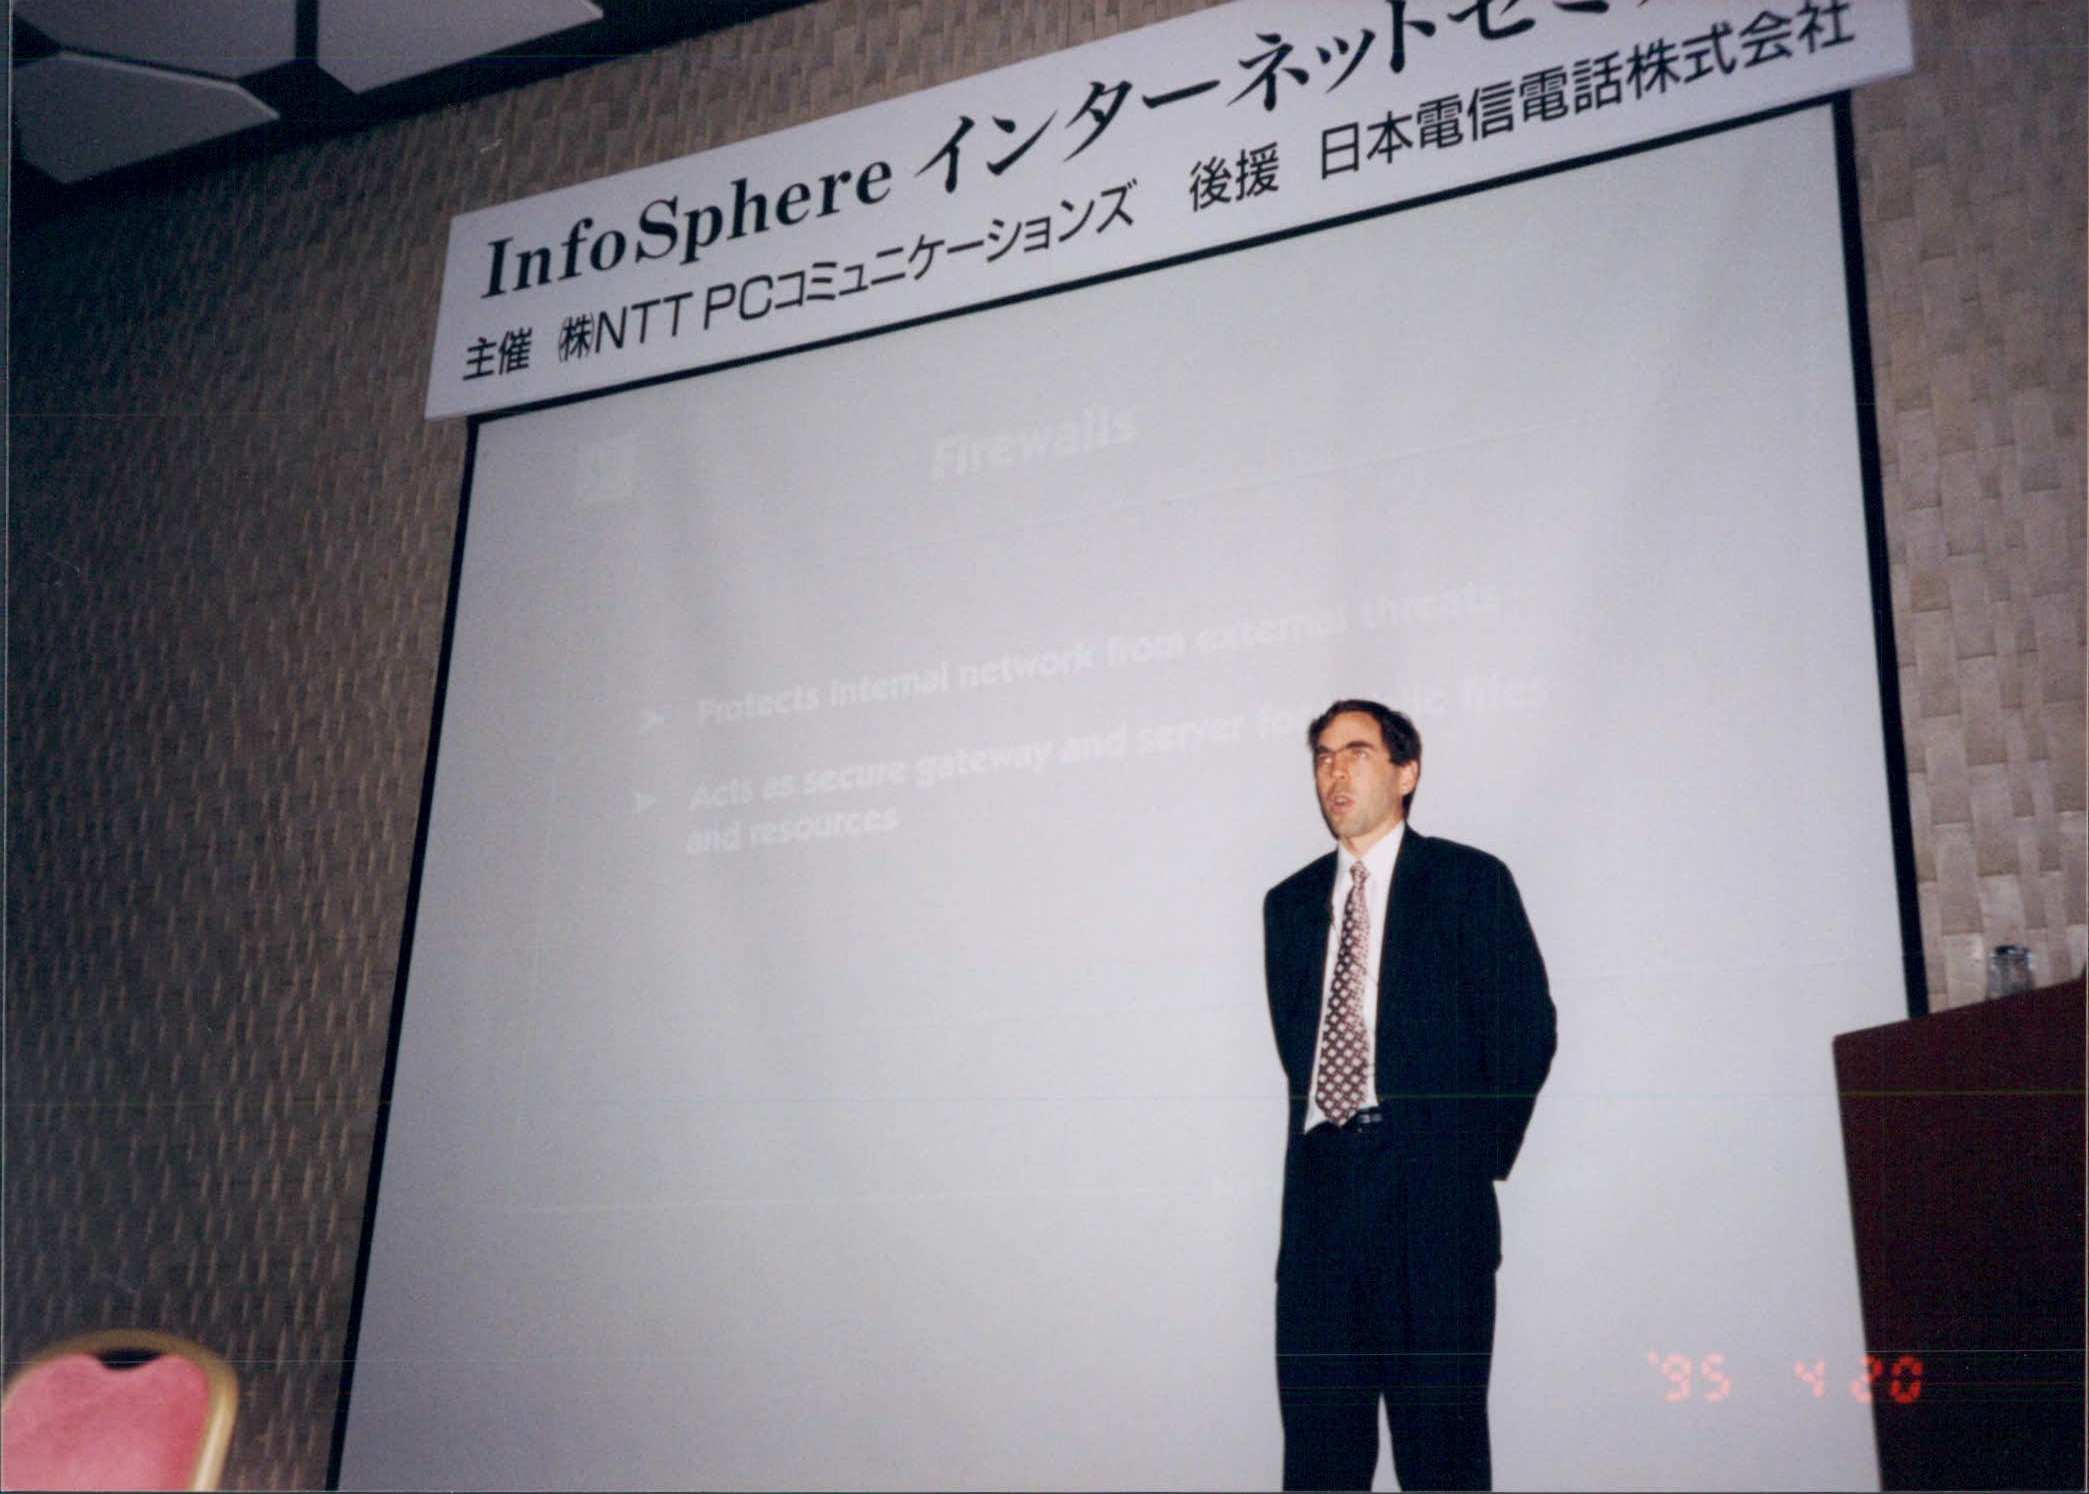 John c. 1995<br />Presentation in Tokyo with Sumisho (Isao) to about 400 attendees